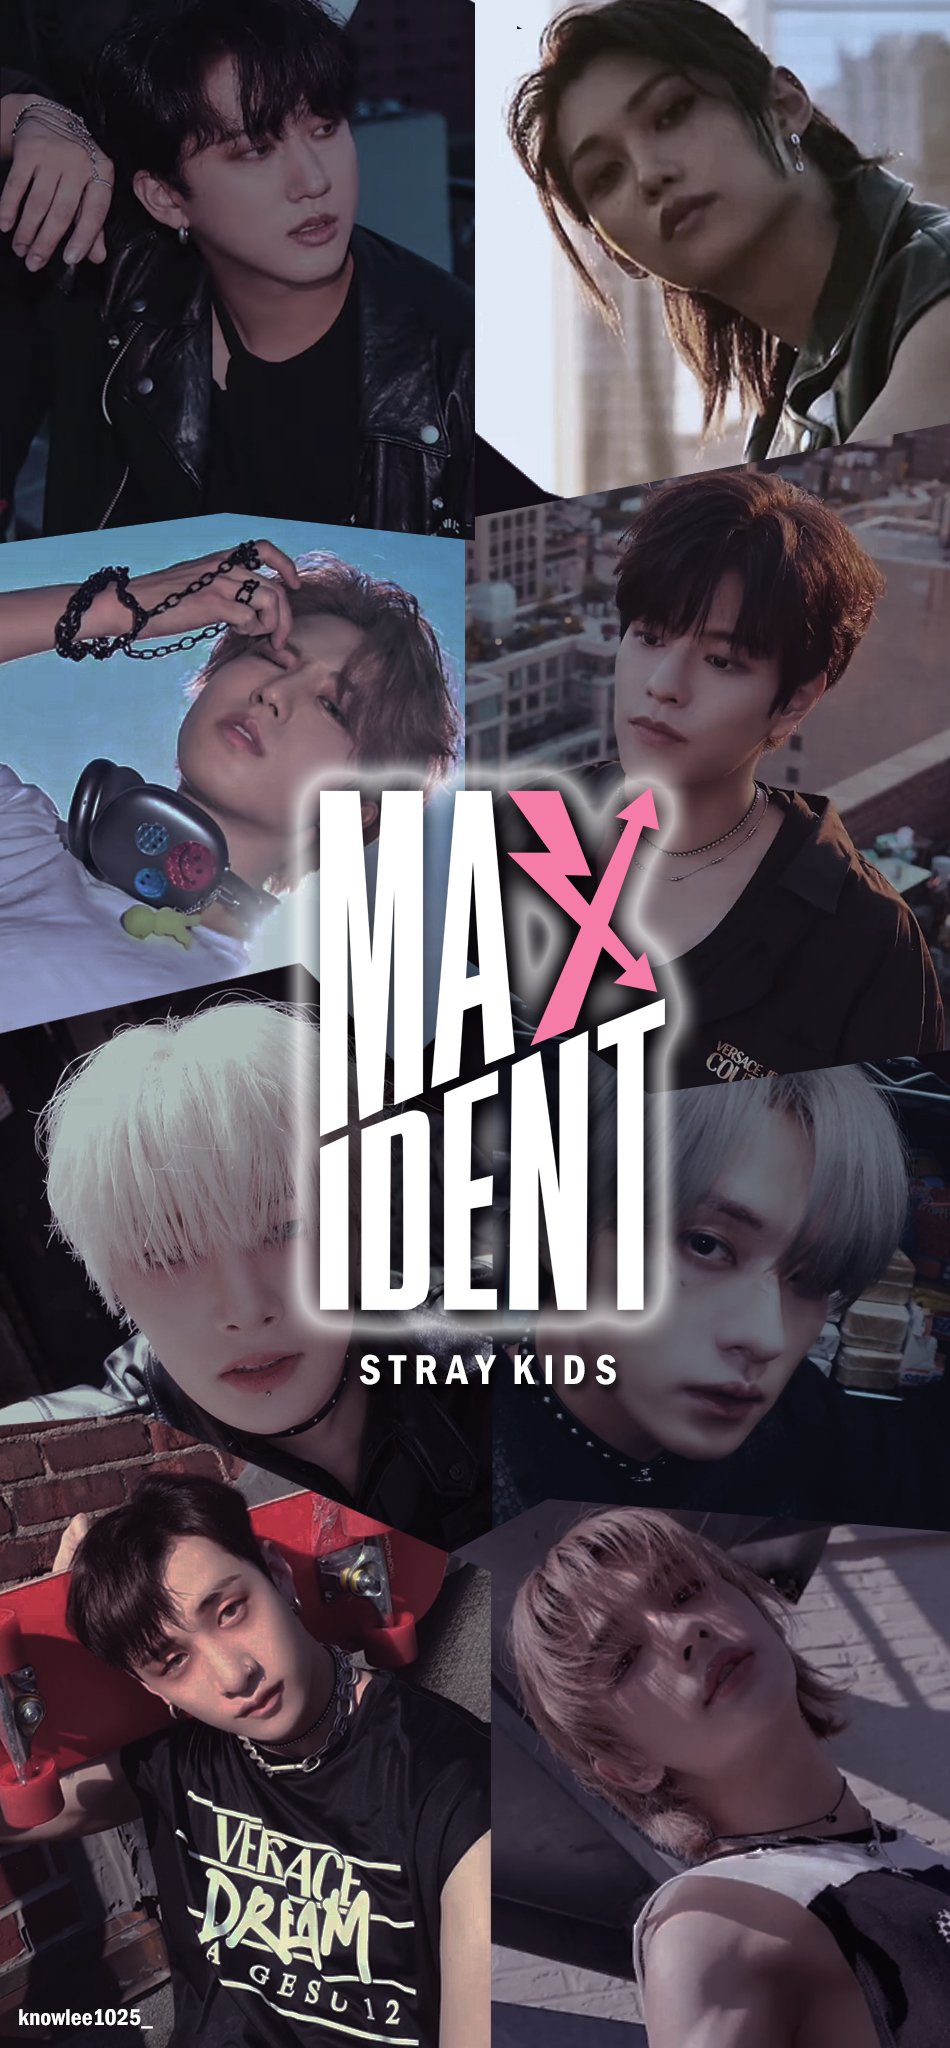 Riz ⤮ - #StrayKids #MAXIDENT Wallpaper Lockscreen Feel Free To Use!♡♡ Rts And Likes Are Highly Appreciated :)